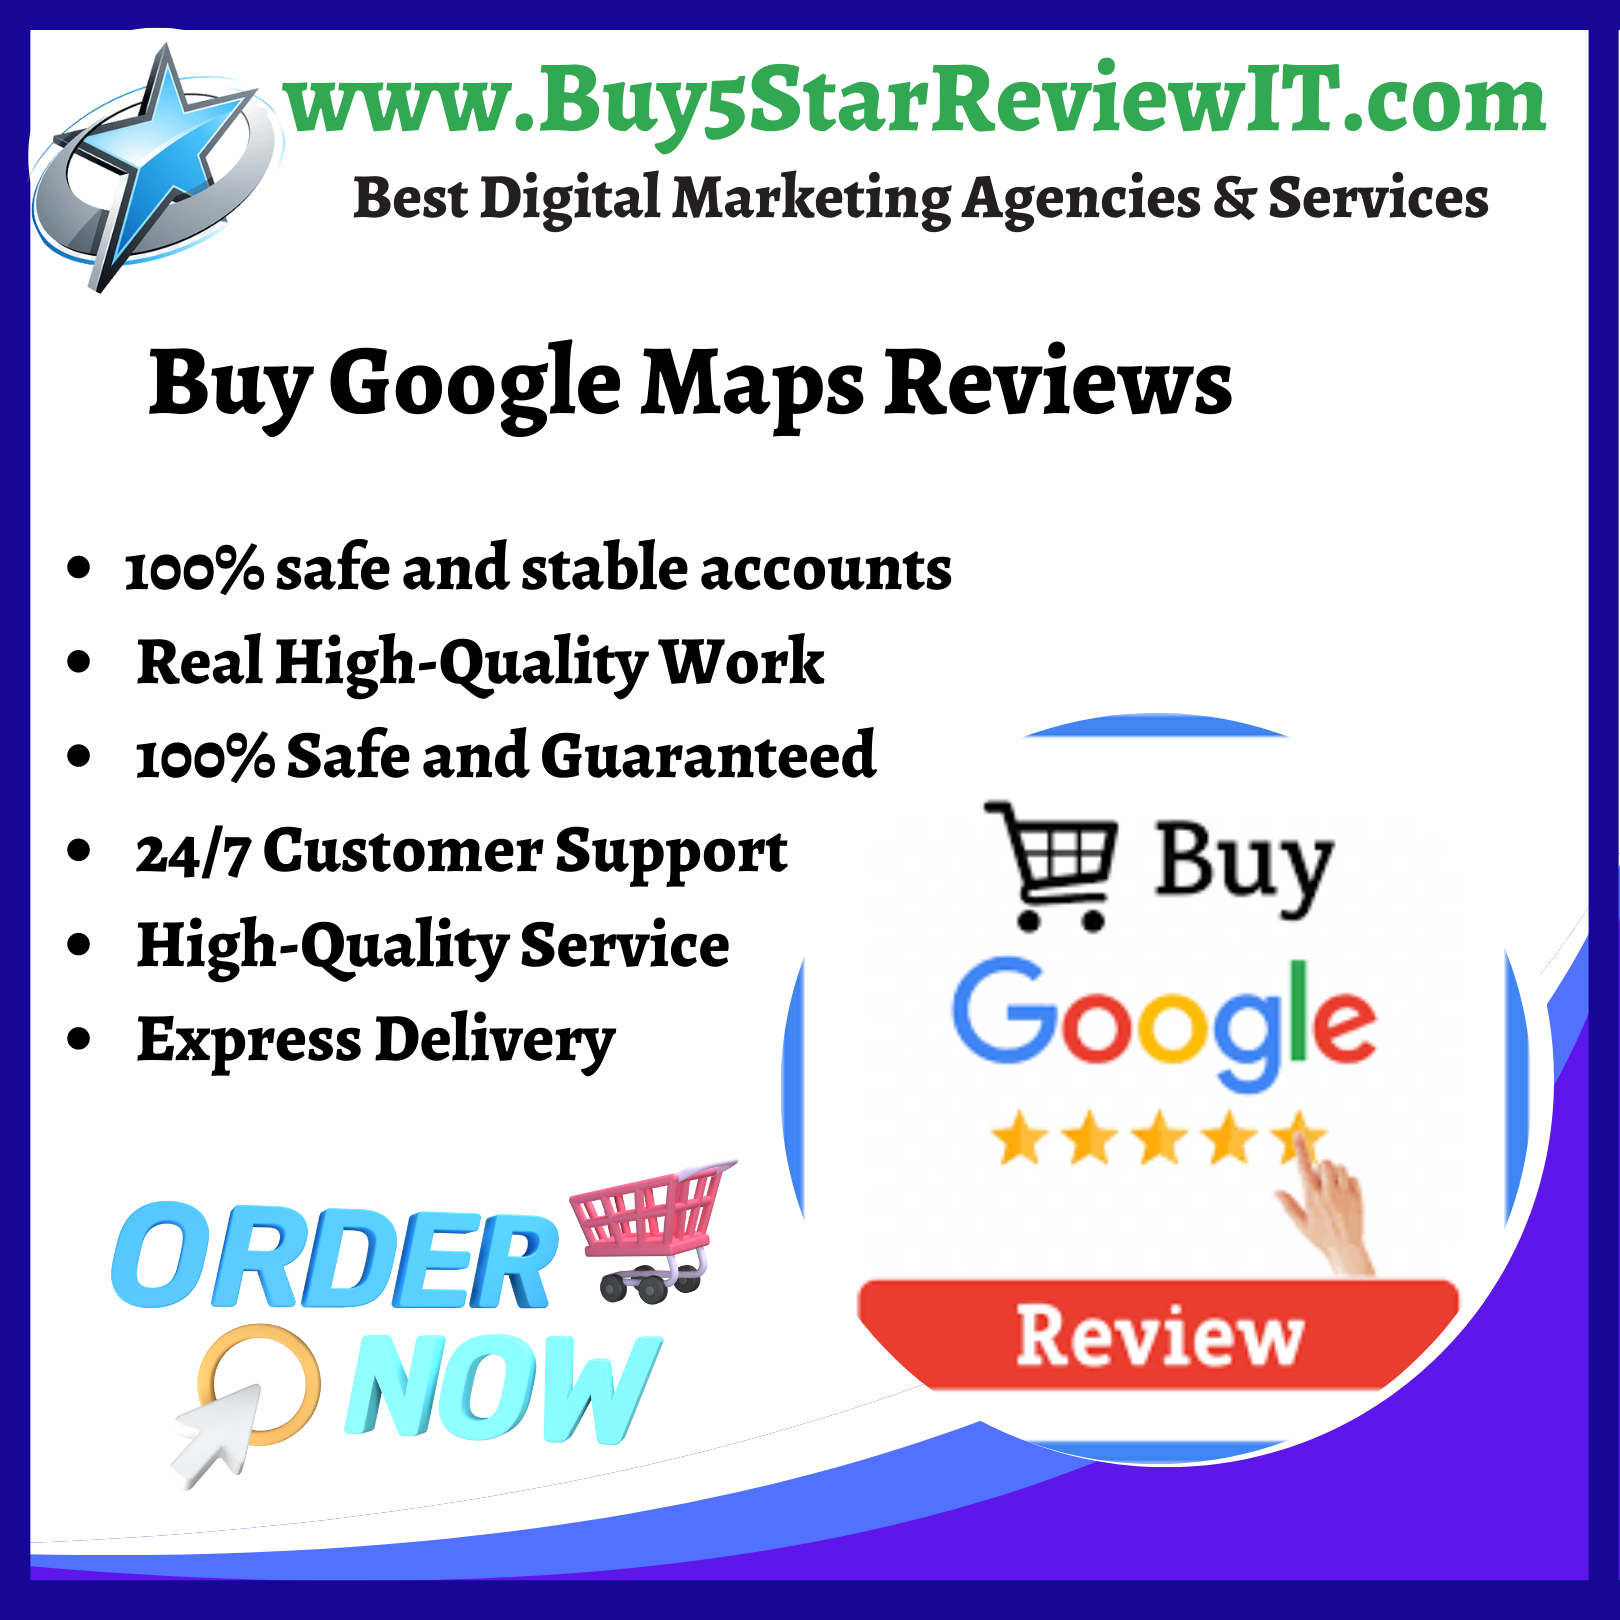 Buy Google Maps Reviews - 100% Legit, Permanent, and Cheap Buy5StarReviewIT